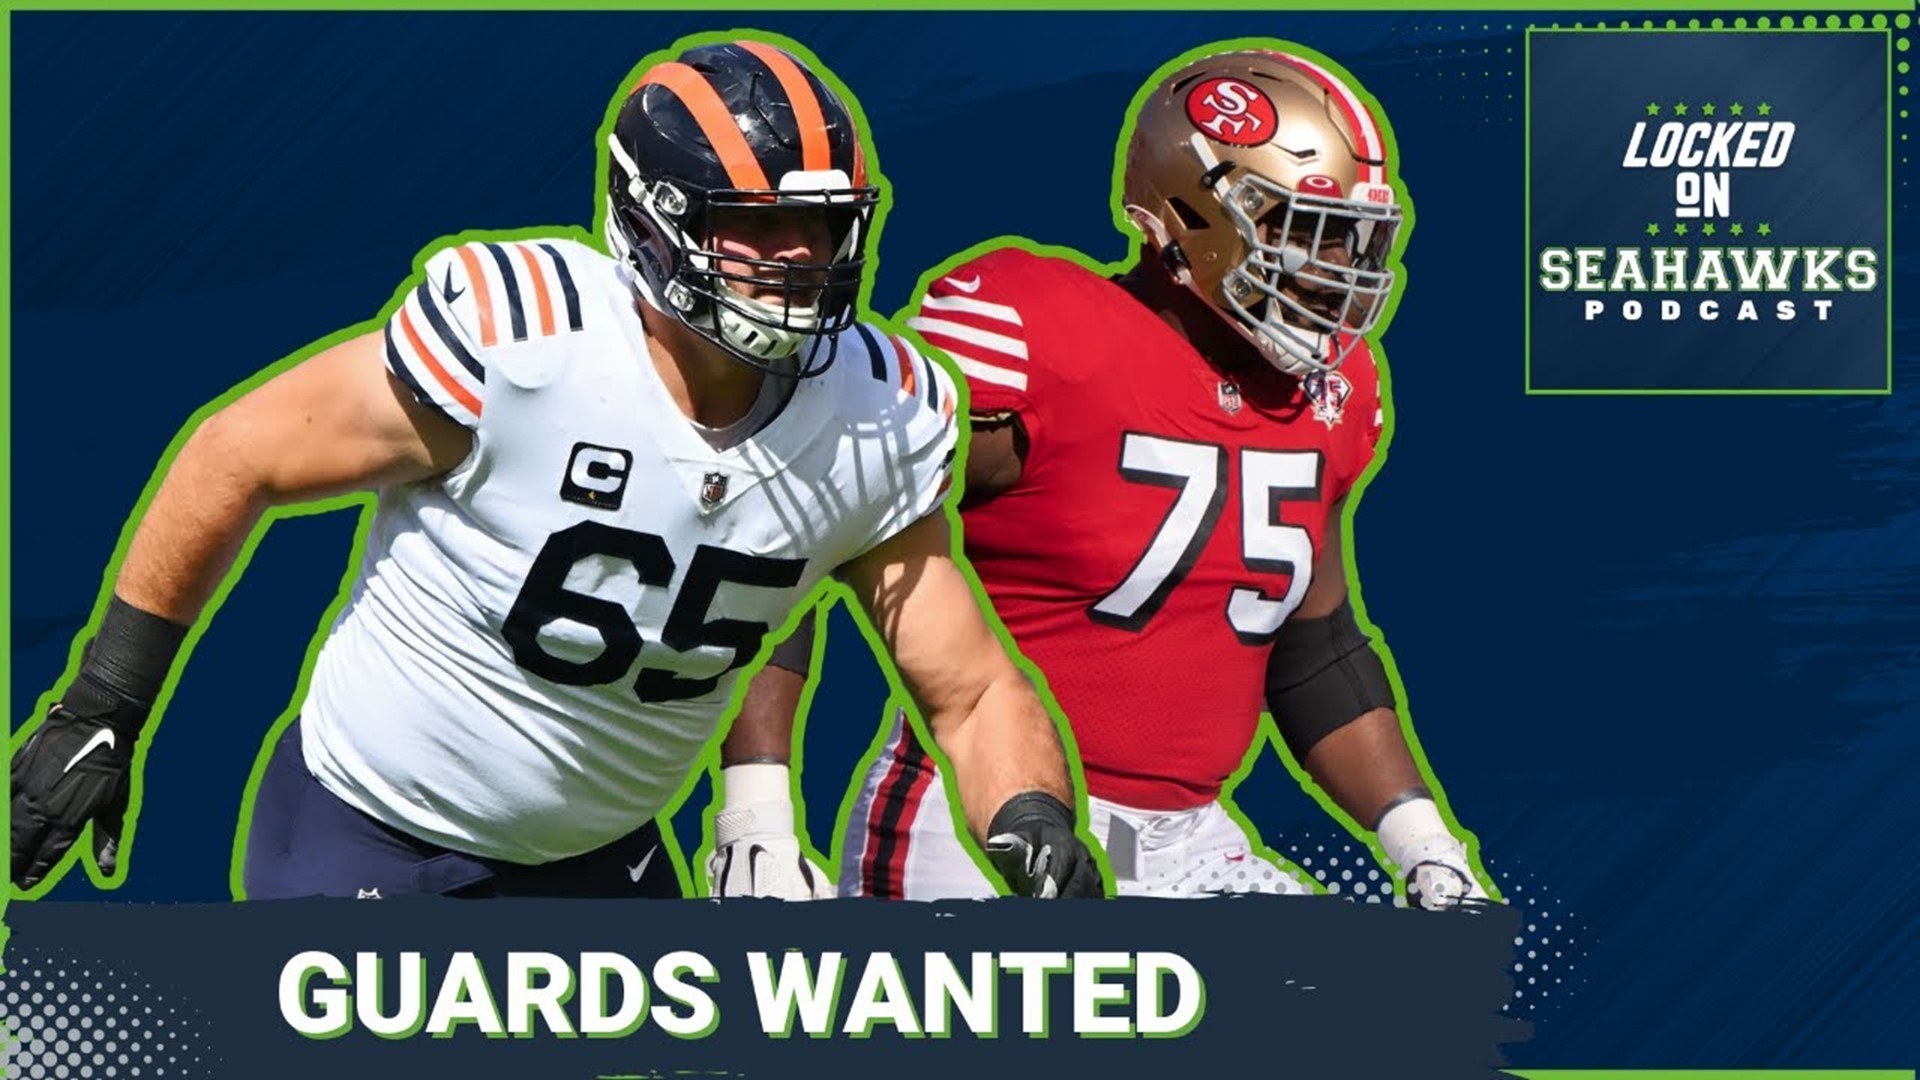 Now more than three weeks into the new league year, the Seahawks may not be done adding veteran free agents just yet with two experienced guards on the radar